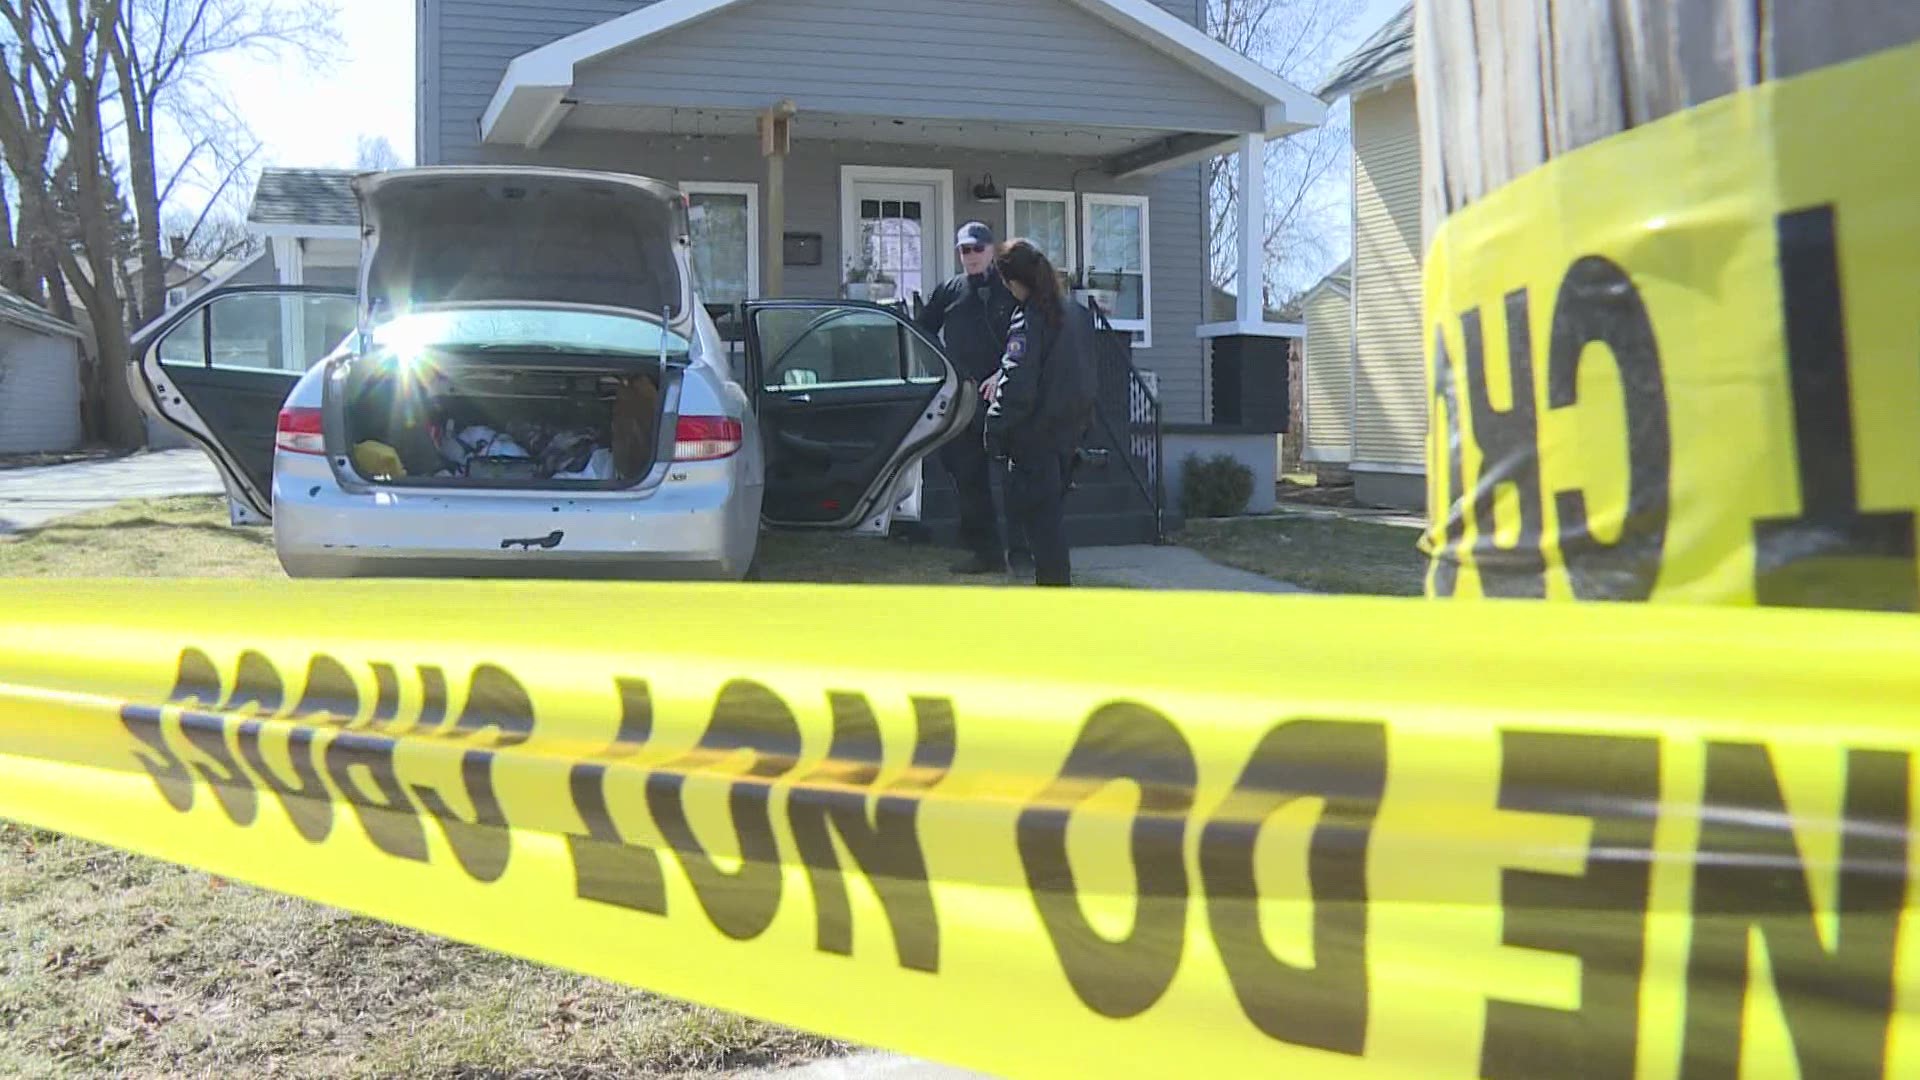 Grand Rapids Police Department are investigating a shooting on the city’s North end on Friday.